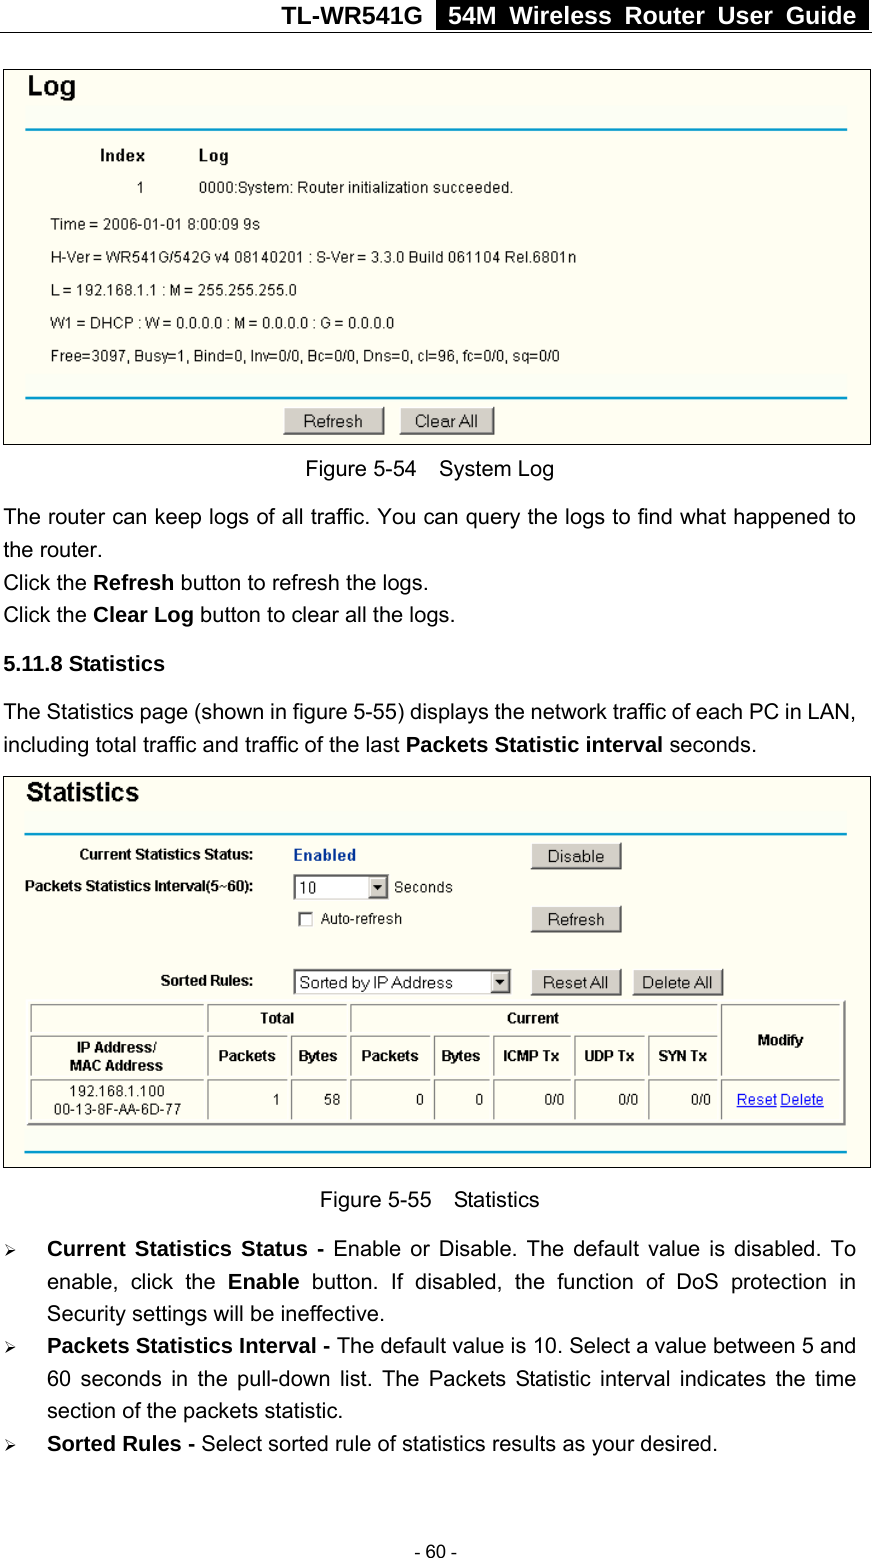 TL-WR541G   54M Wireless Router User Guide   Figure 5-54  System Log The router can keep logs of all traffic. You can query the logs to find what happened to the router. Click the Refresh button to refresh the logs. Click the Clear Log button to clear all the logs. 5.11.8 Statistics The Statistics page (shown in figure 5-55) displays the network traffic of each PC in LAN, including total traffic and traffic of the last Packets Statistic interval seconds.    Figure 5-55  Statistics ¾ Current Statistics Status - Enable or Disable. The default value is disabled. To enable, click the Enable button. If disabled, the function of DoS protection in Security settings will be ineffective.   ¾ Packets Statistics Interval - The default value is 10. Select a value between 5 and 60 seconds in the pull-down list. The Packets Statistic interval indicates the time section of the packets statistic.   ¾ Sorted Rules - Select sorted rule of statistics results as your desired.   - 60 - 